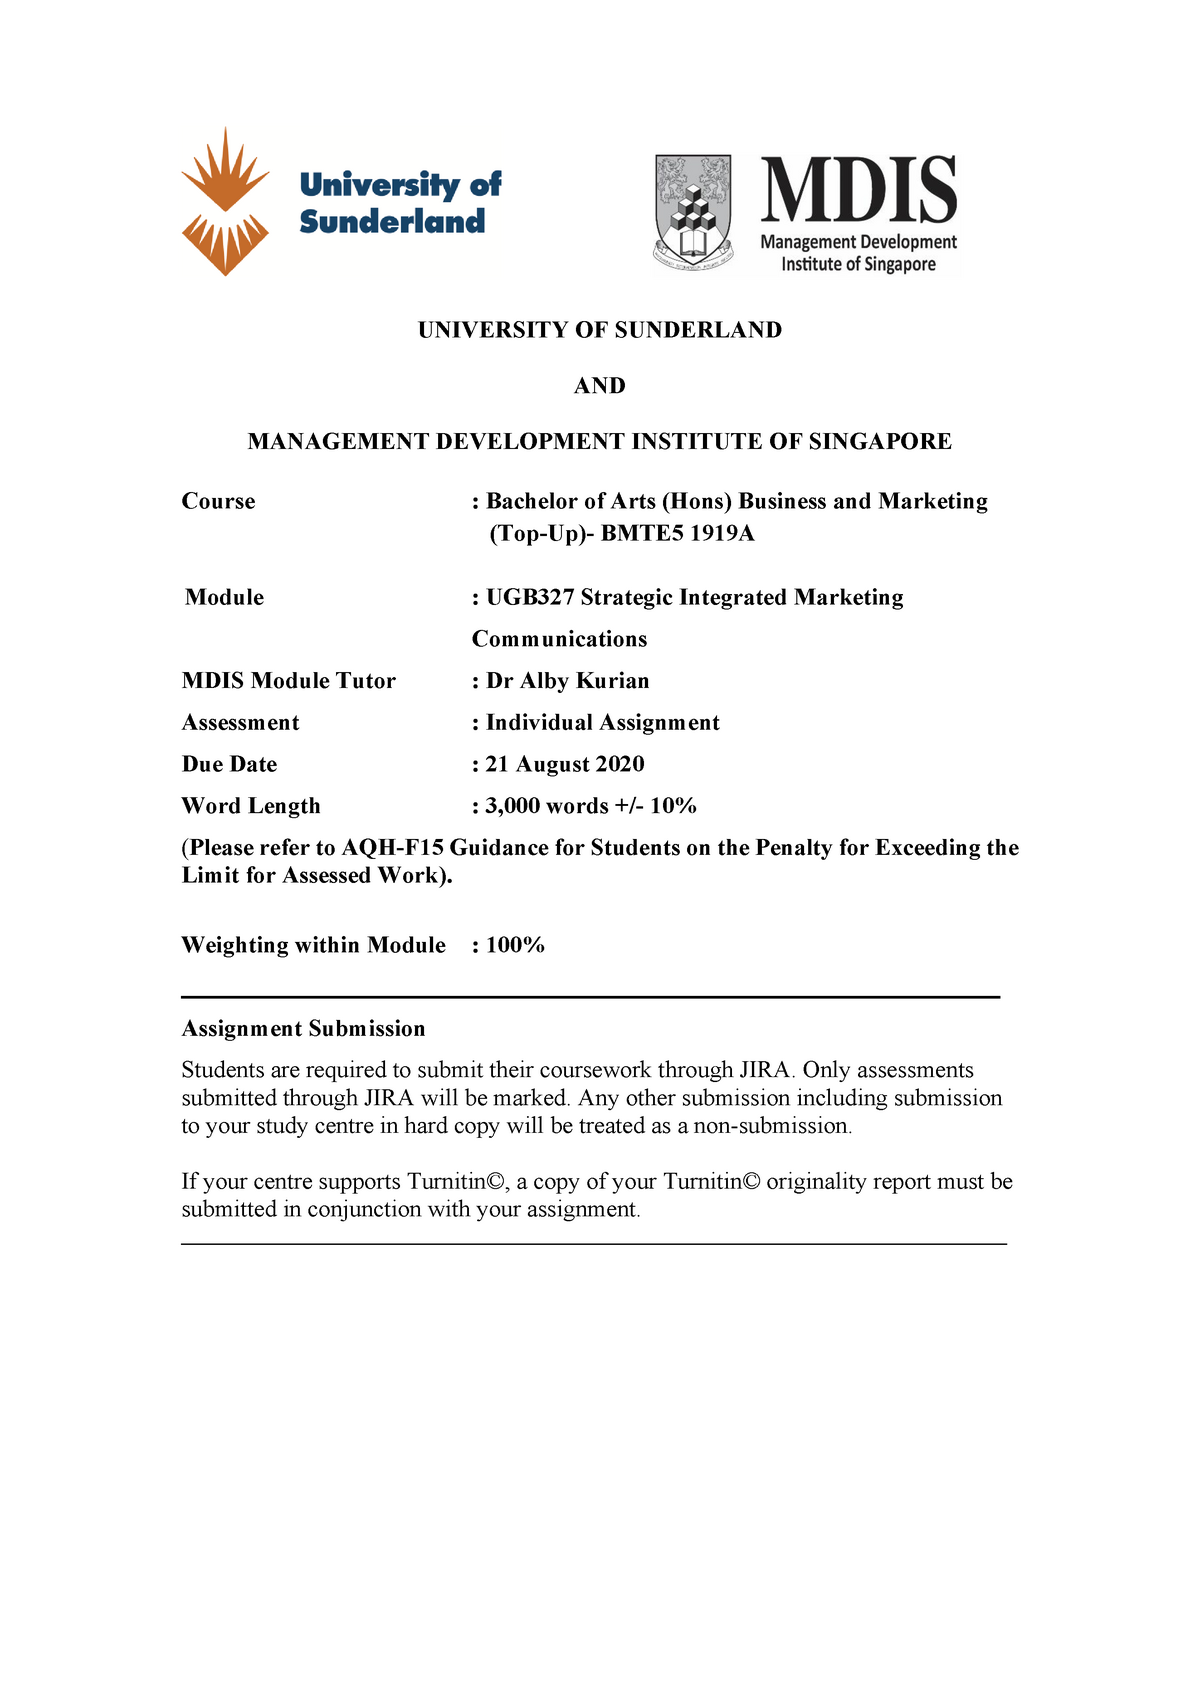 university of sunderland online assignment submission